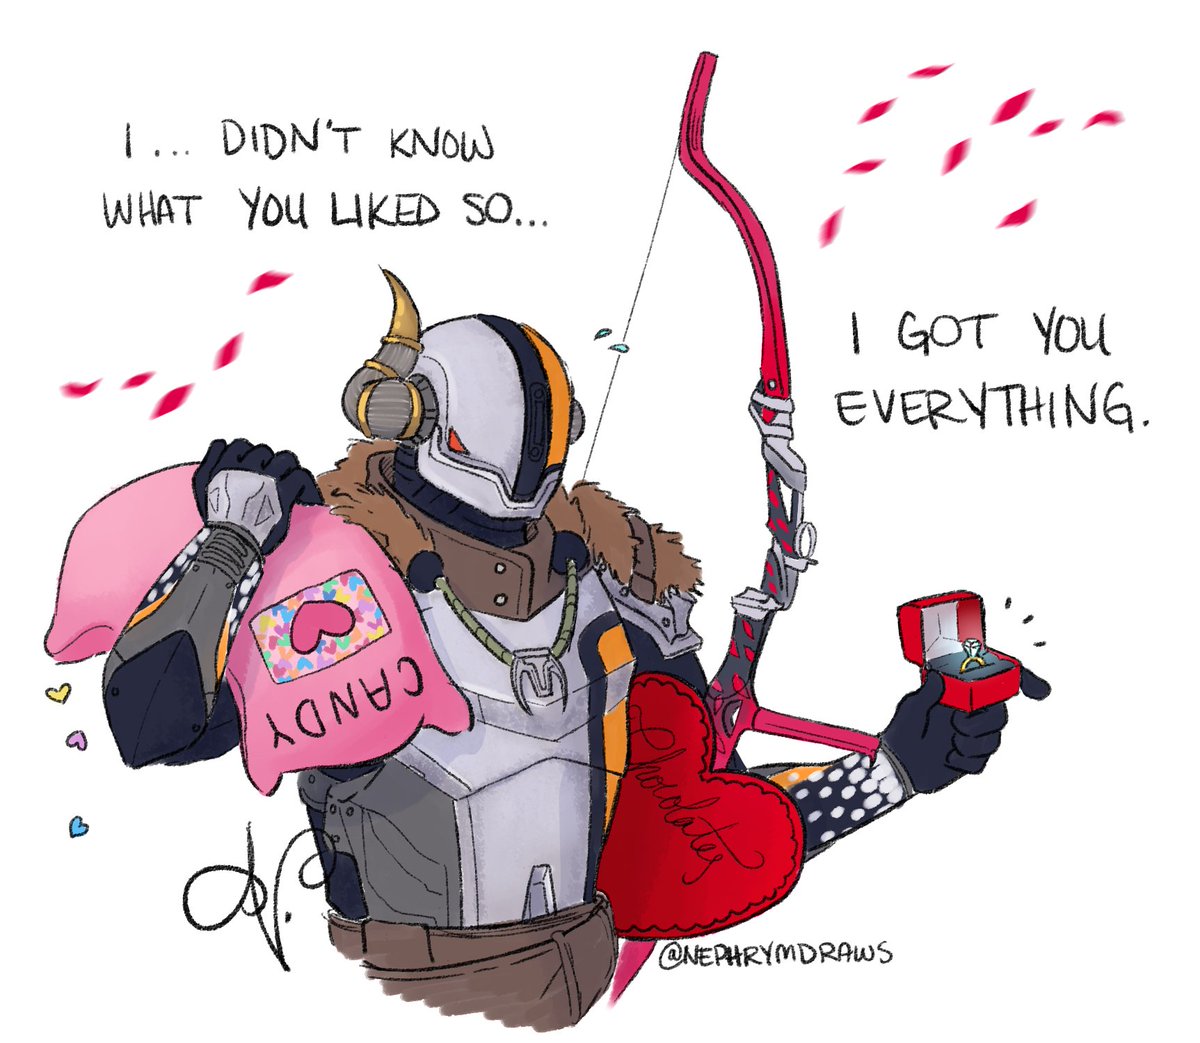 Happy Valentine's Day from Lord SHAXX. 